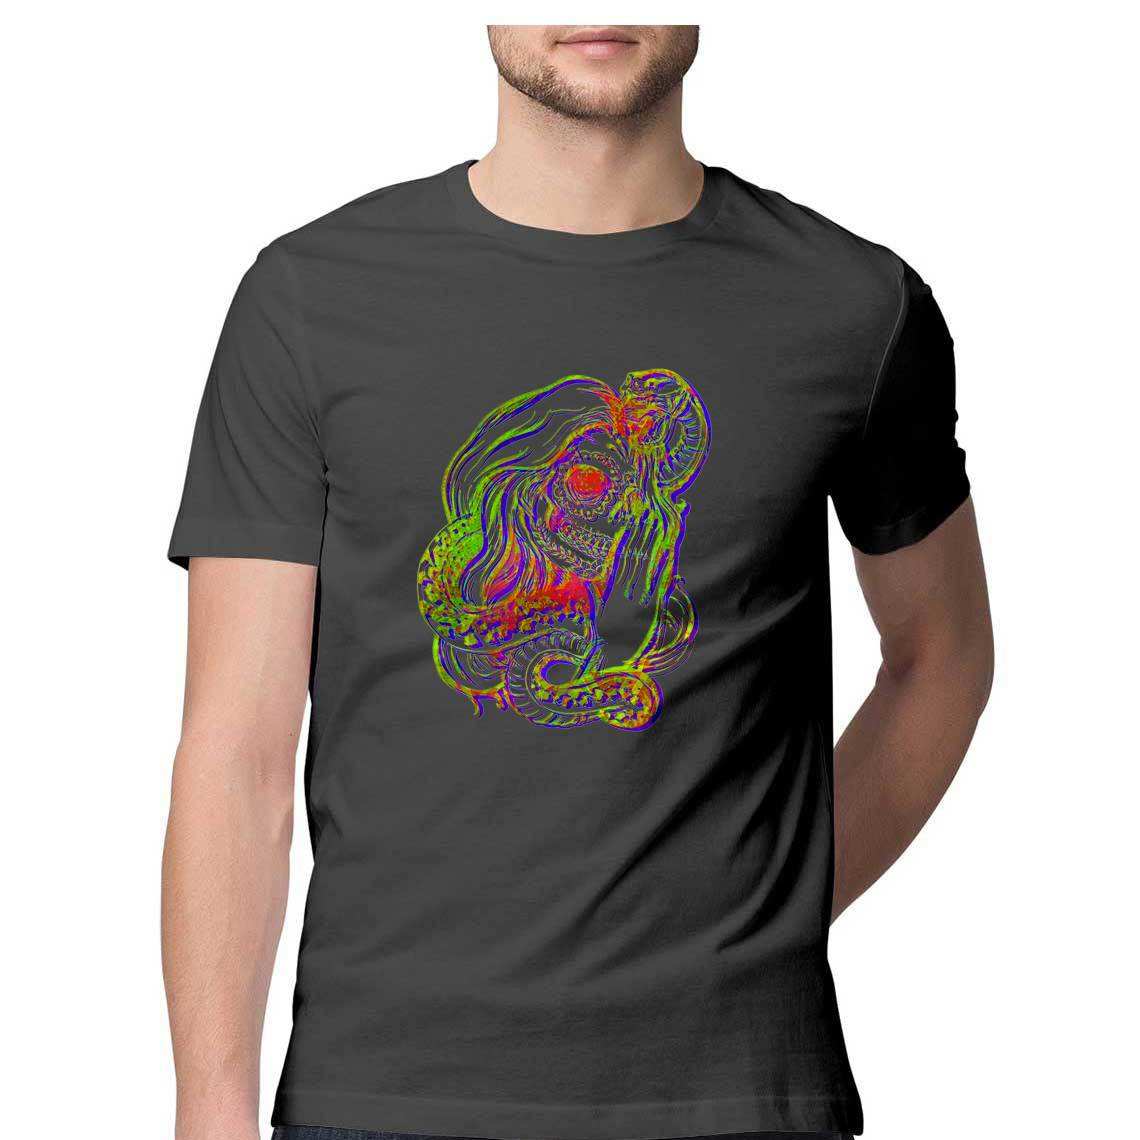 Lady Madonna on the Day of the Dead Men's T-Shirt - CBD Store India